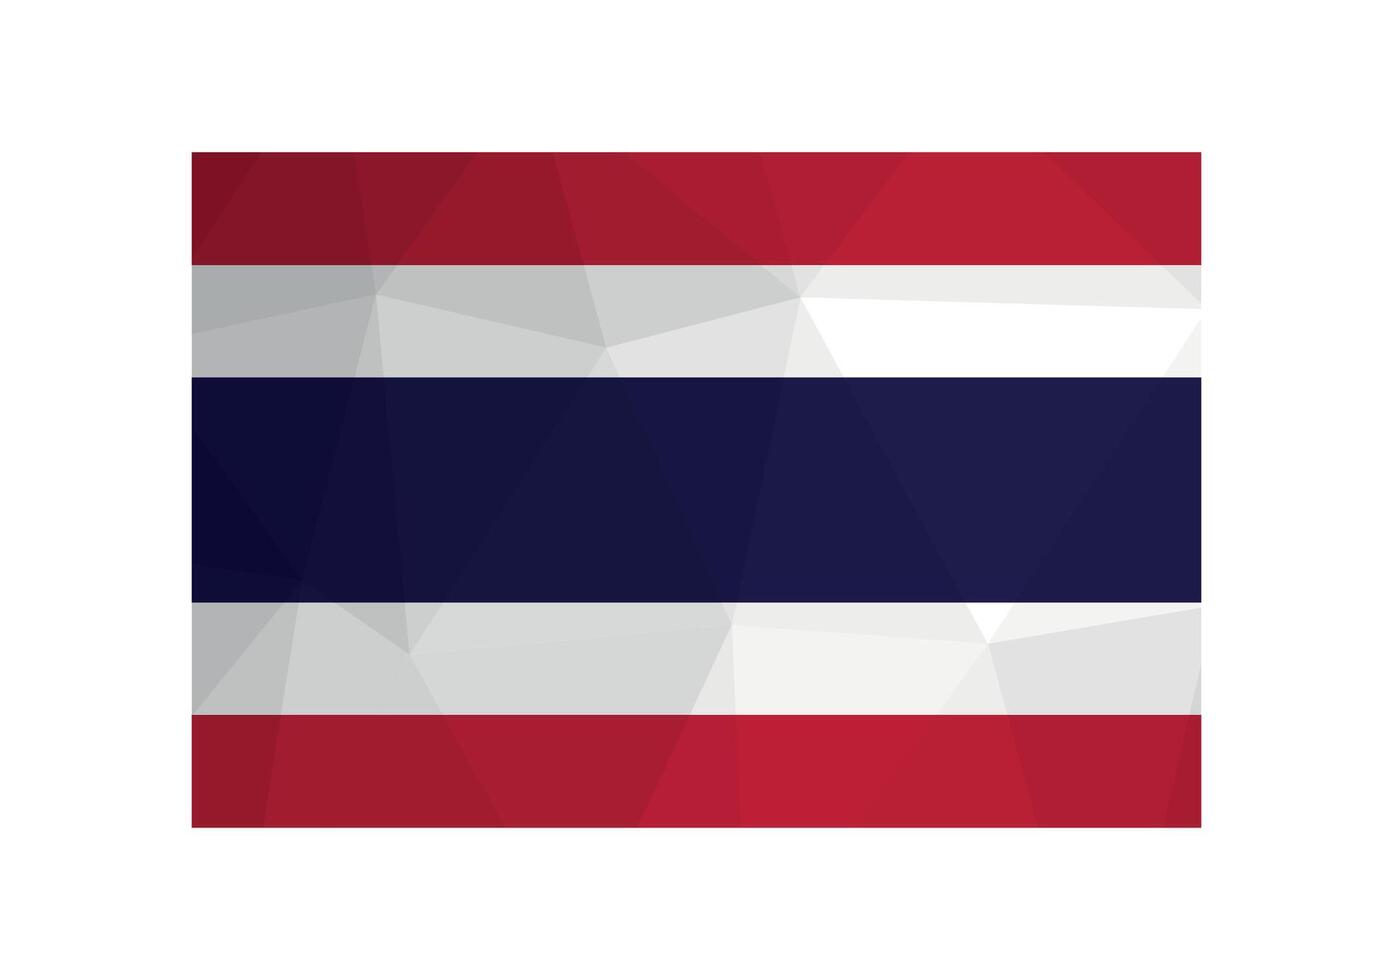 Vector illustration. Official ensign of Thailand. National Siam flag with red, white, blue stripes. Creative design in low poly style with triangular shapes.